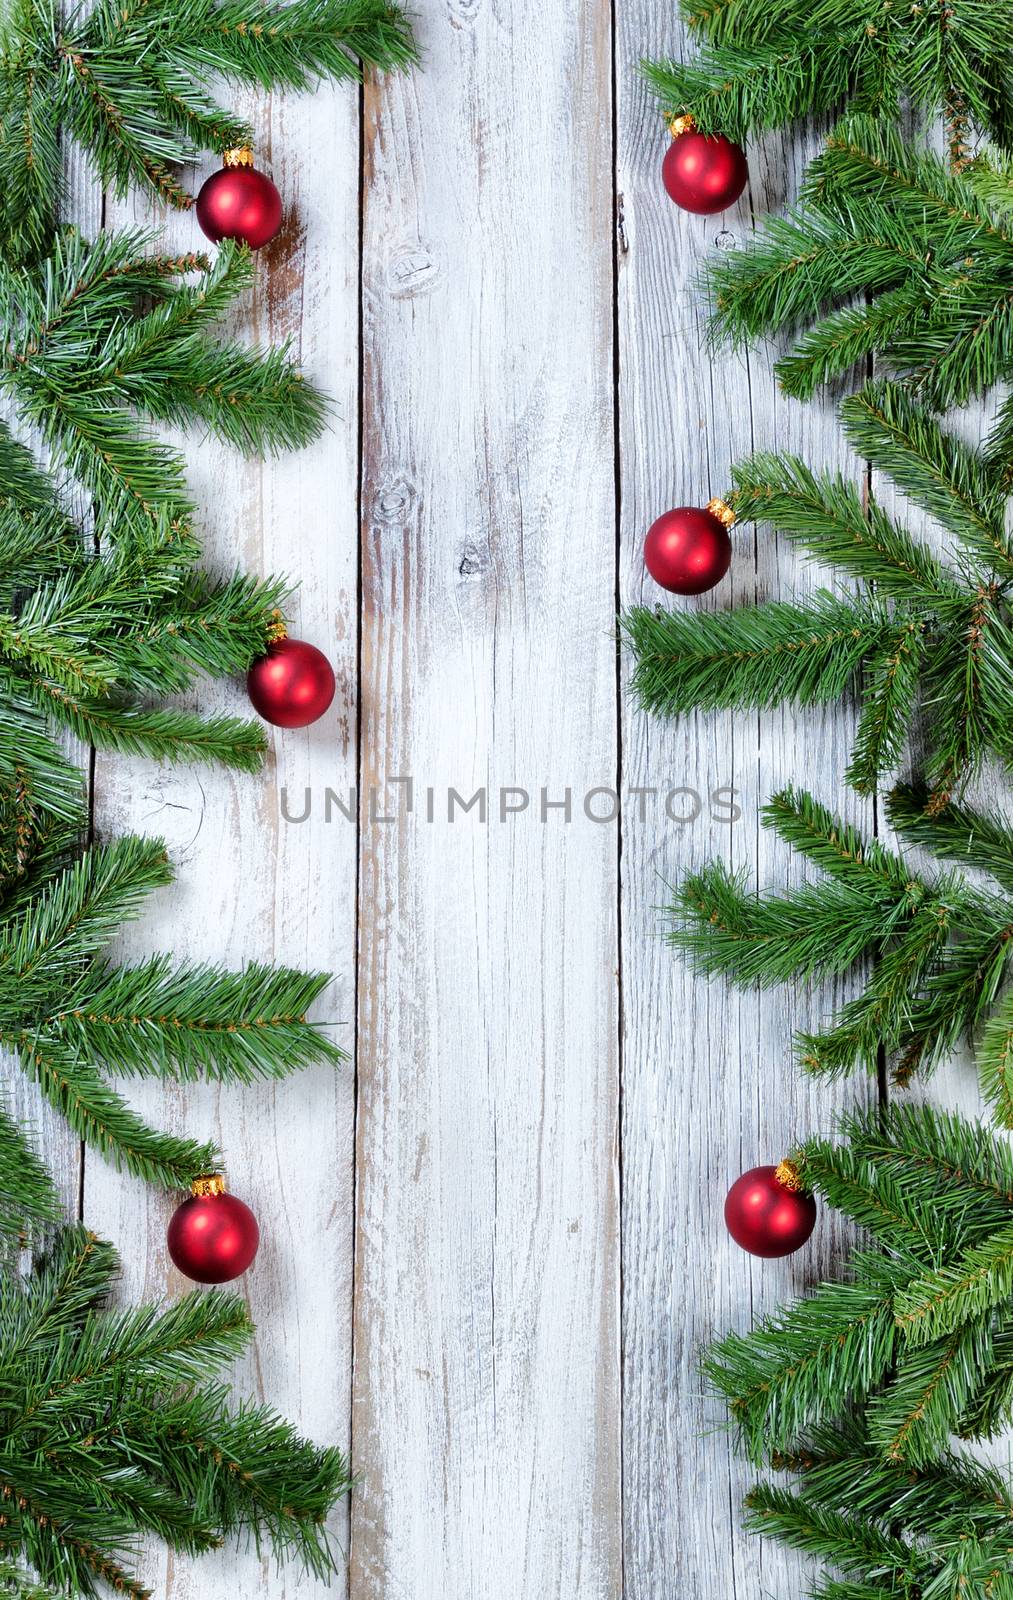 Christmas tree branches and red ornaments forming vertical borders on rustic white wood